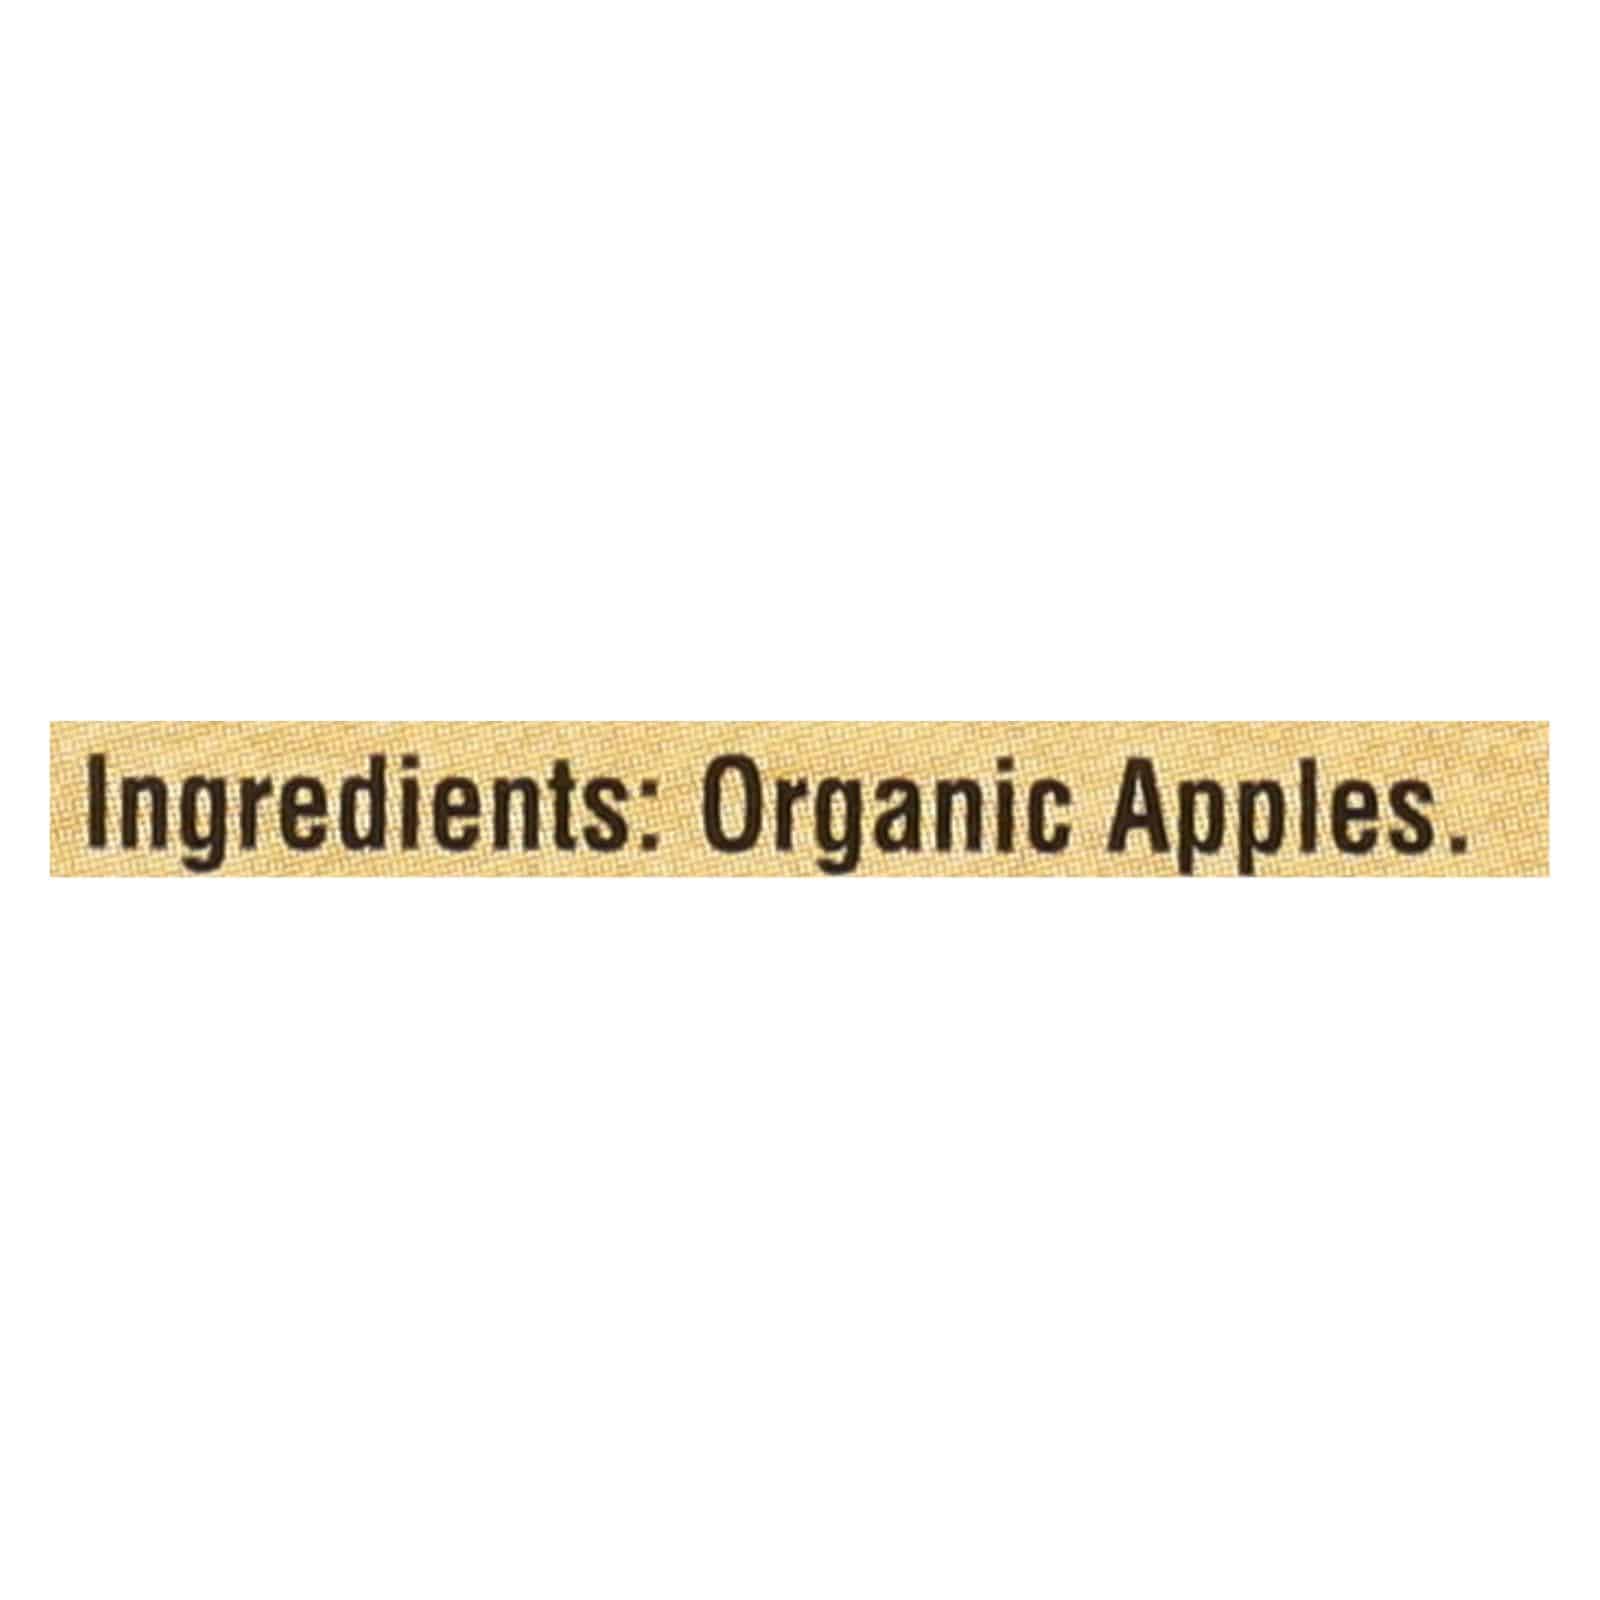 North Coast - Applesauce Pouch - Case Of 6 - 4-3.2 Oz | OnlyNaturals.us